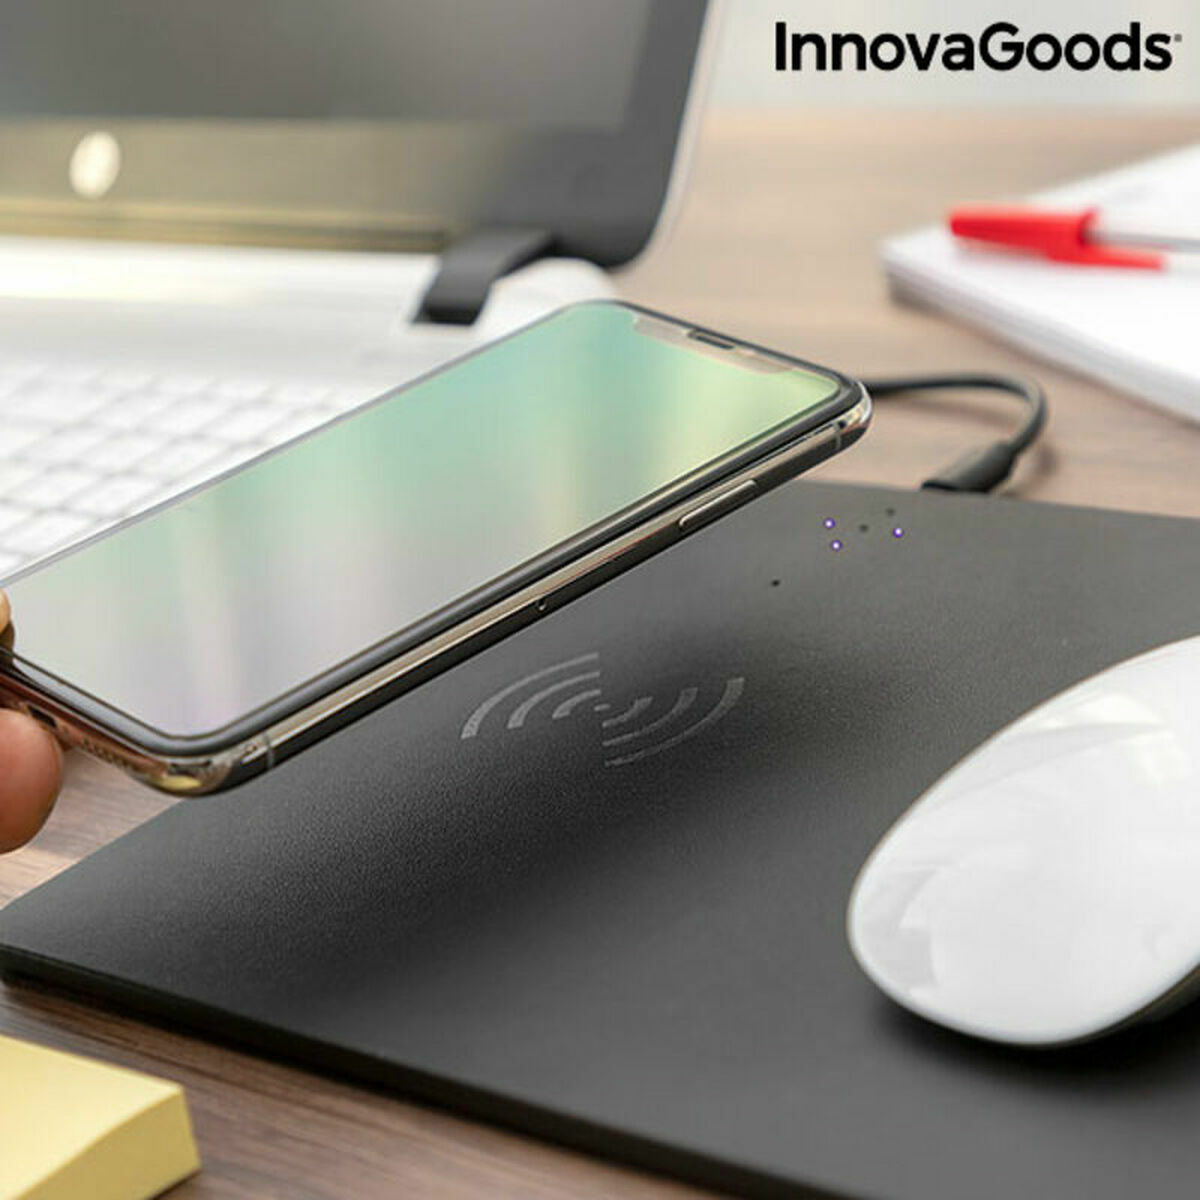 2-in-1 Mouse Mat with Wireless Charging InnovaGoods Padwer (Refurbished A)